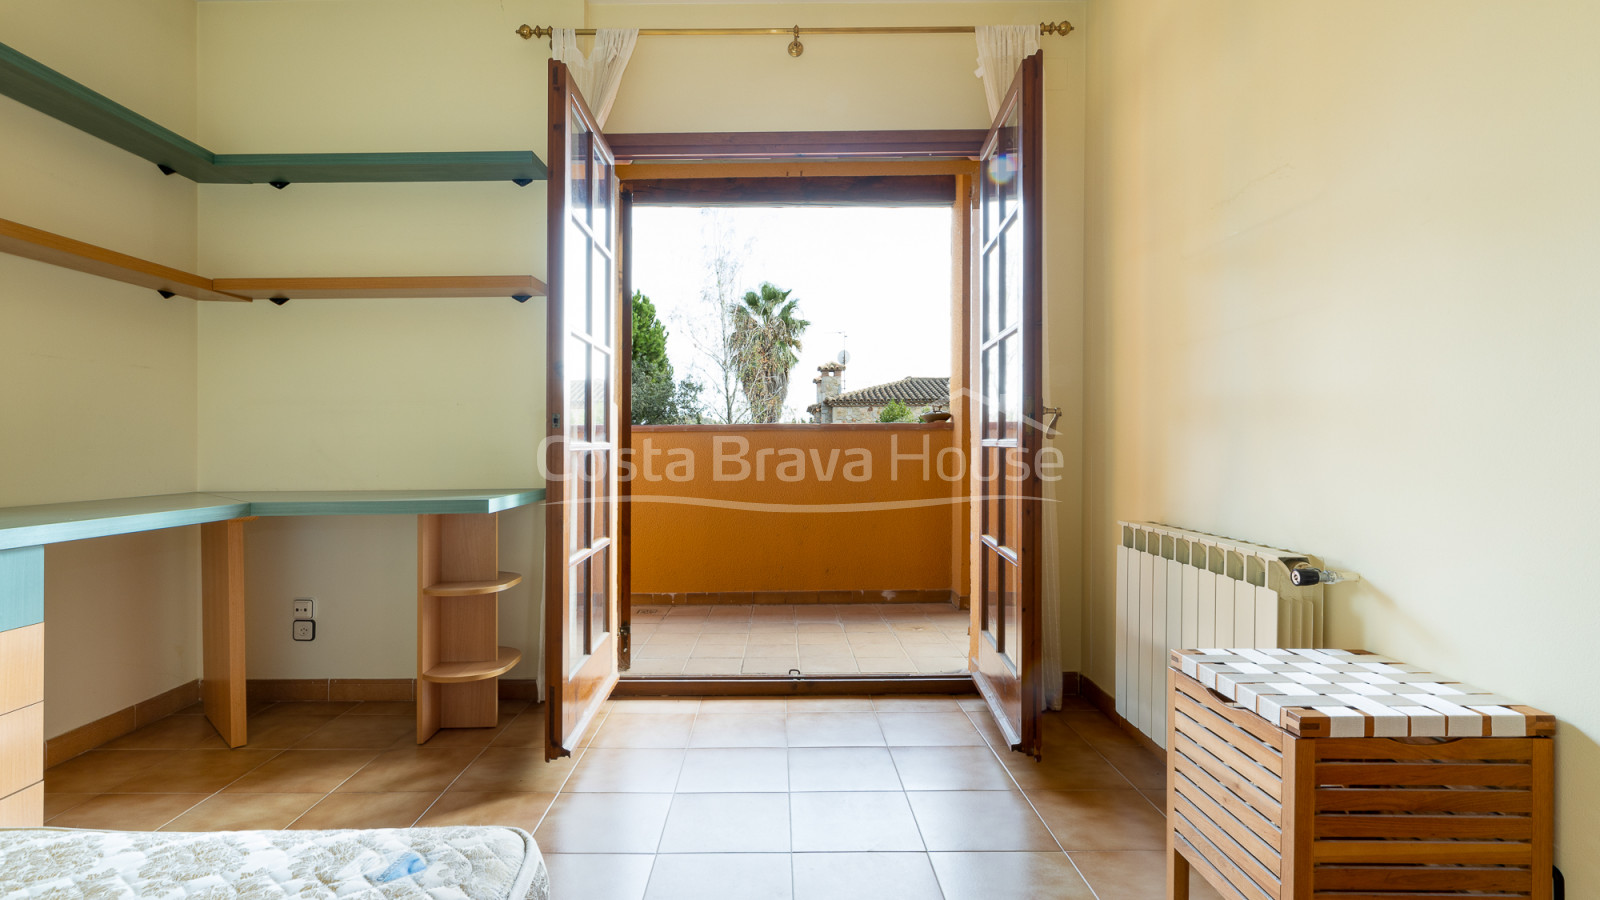 Attractive house with pool and 1600 m² of land for sale in Mont-ras